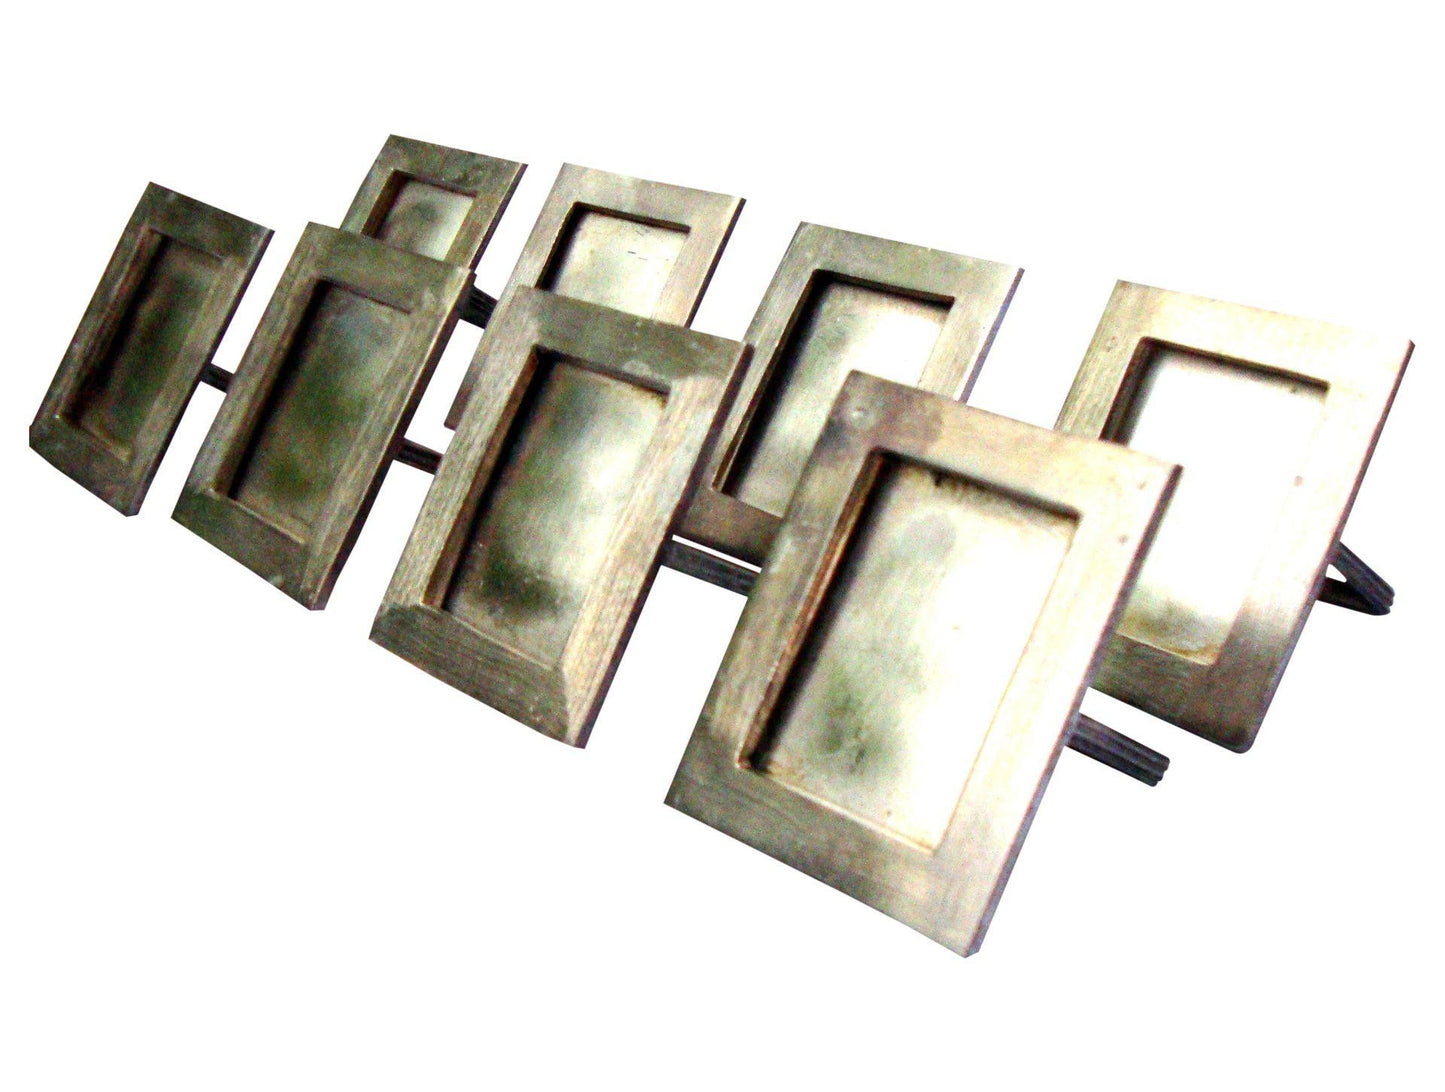 [Sold] Silver Plated Place Holders Napkin Rings - 8